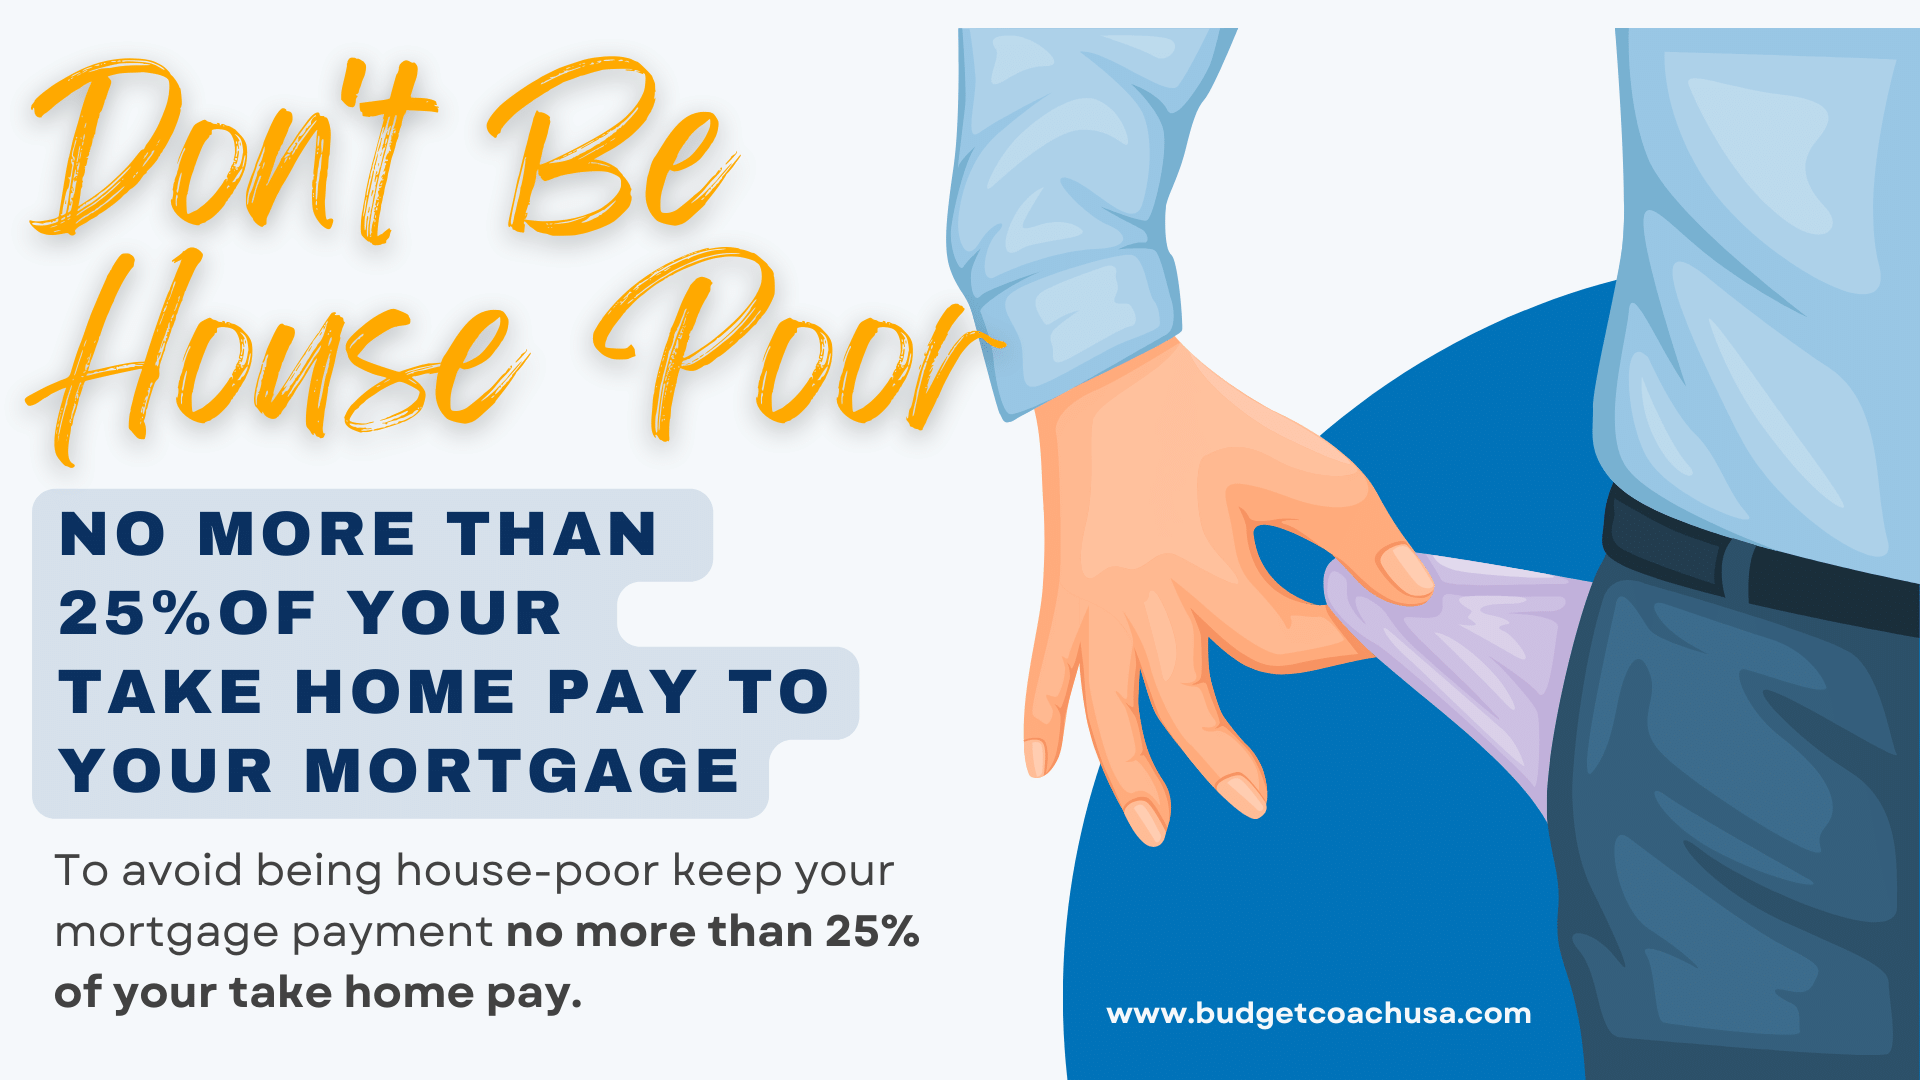 To Avoid being house poor keep your mortgage payment no more than 25% of your take home pay.